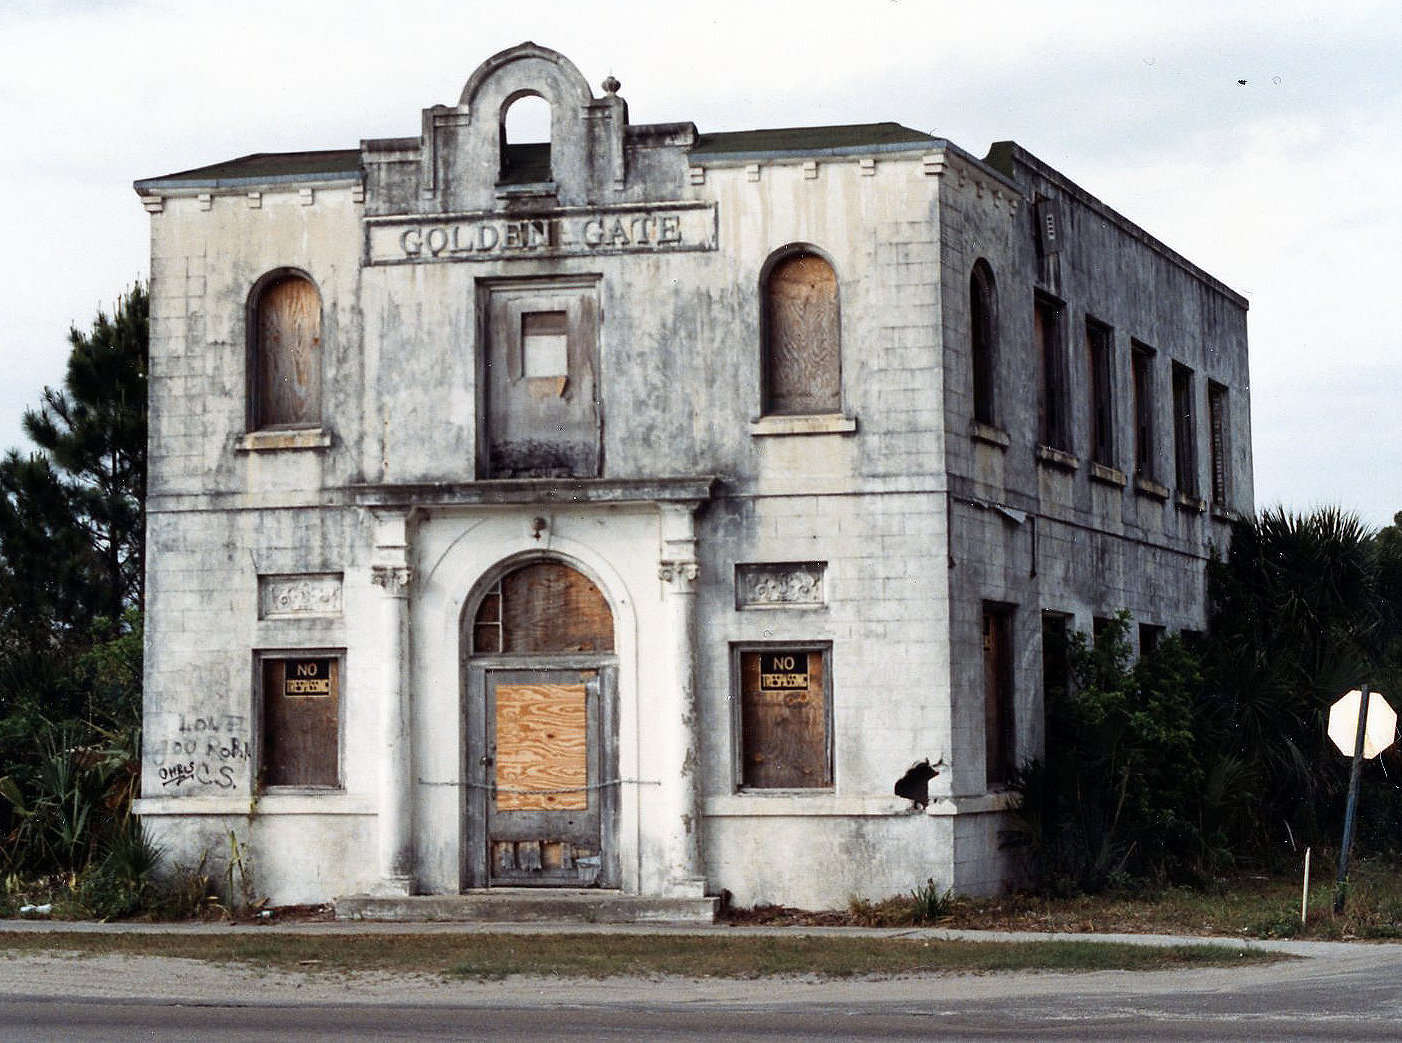 The Golden Gate Building before renovation